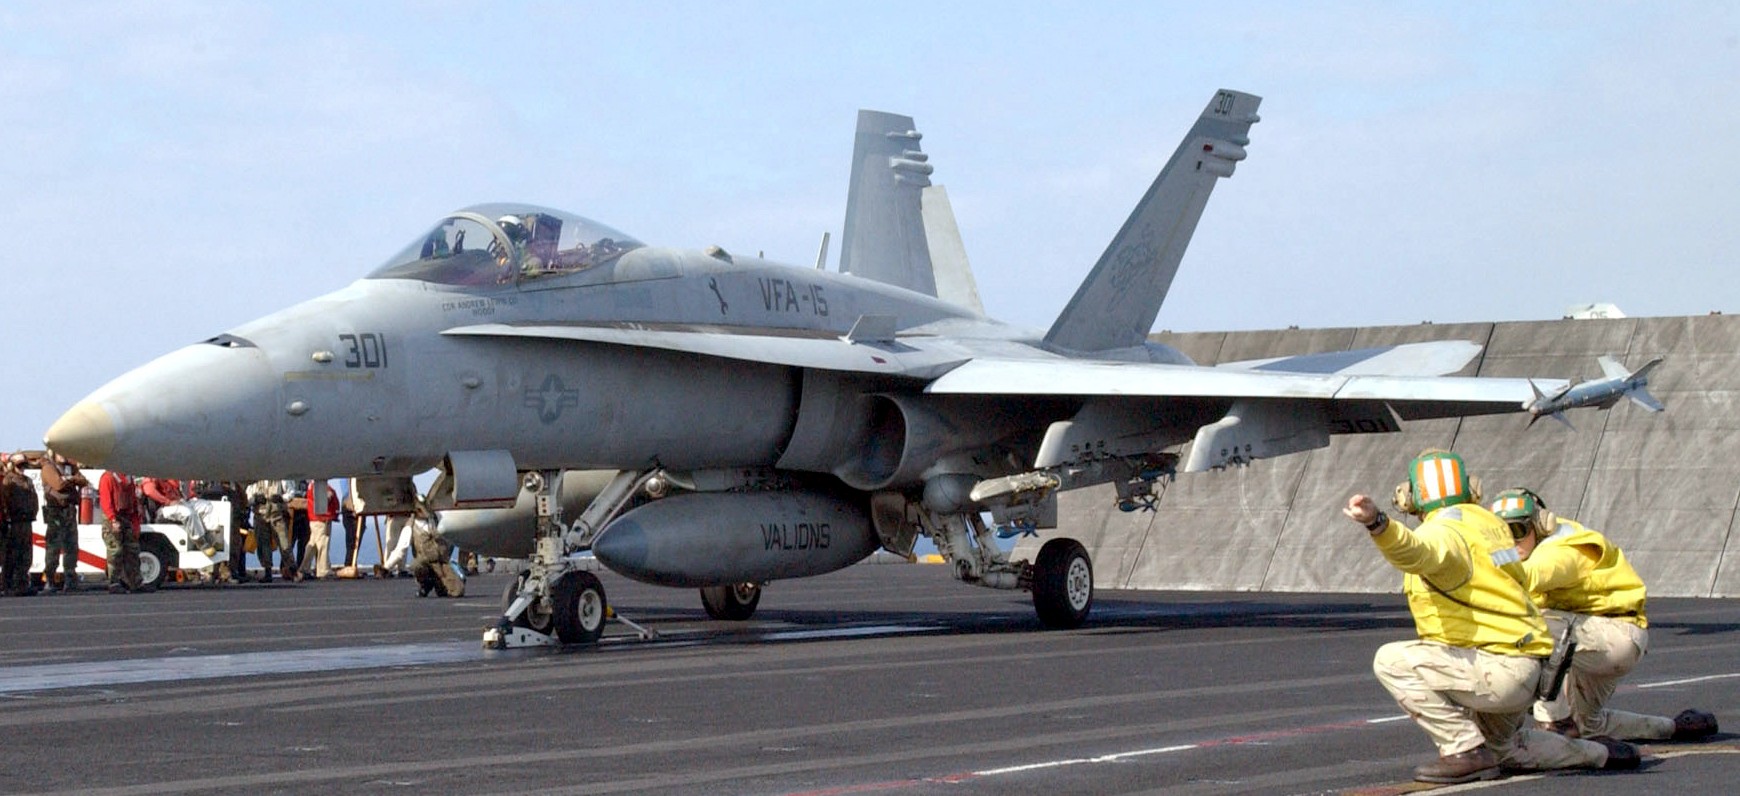 vfa-15 valions strike fighter squadron f/a-18c hornet cvn-71 uss theodore roosevelt cvw-8 us navy 104p